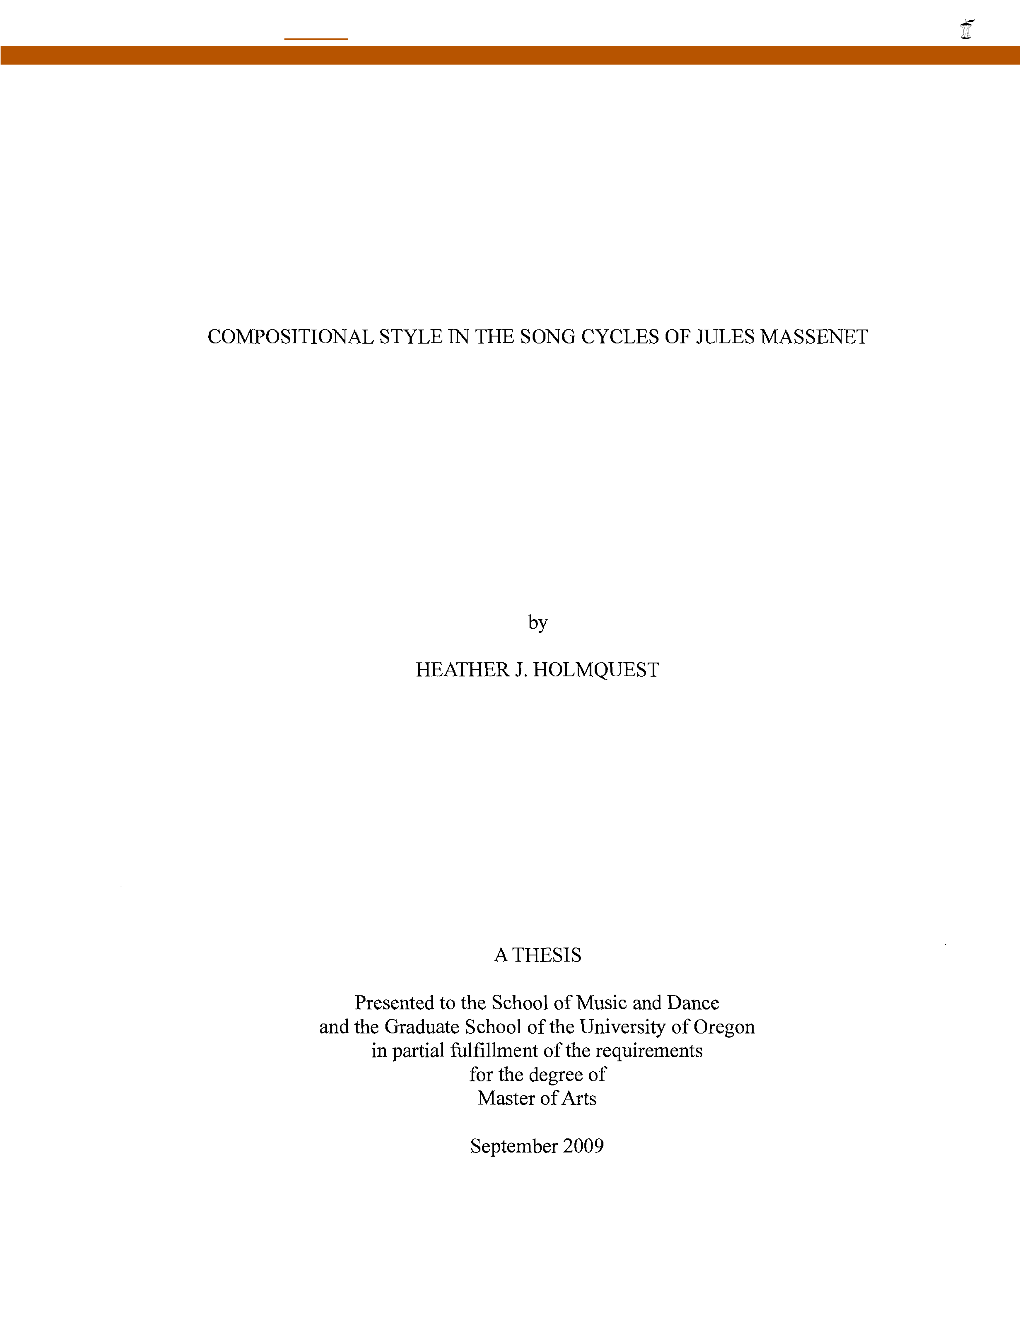 COMPOSITIONAL STYLE in the SONG CYCLES of JULES MASSENET by HEATHER J. HOLMQUEST a THESIS Presented to the School of Music and D